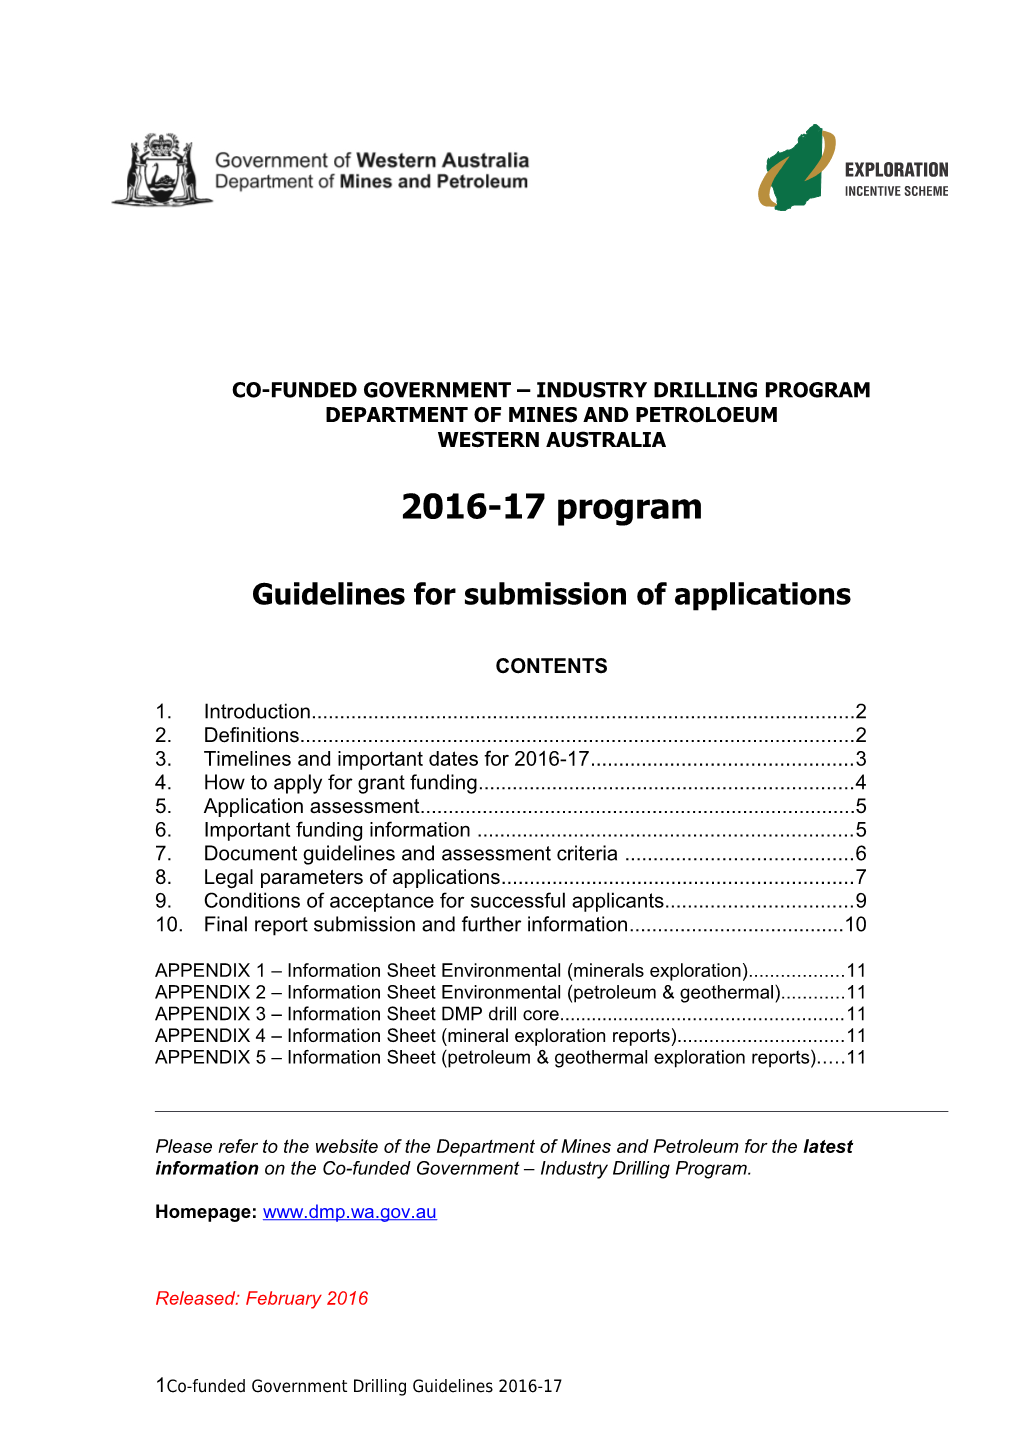 WA Co-Funding Drilling Guidelines Proforma Round 9 2014-15